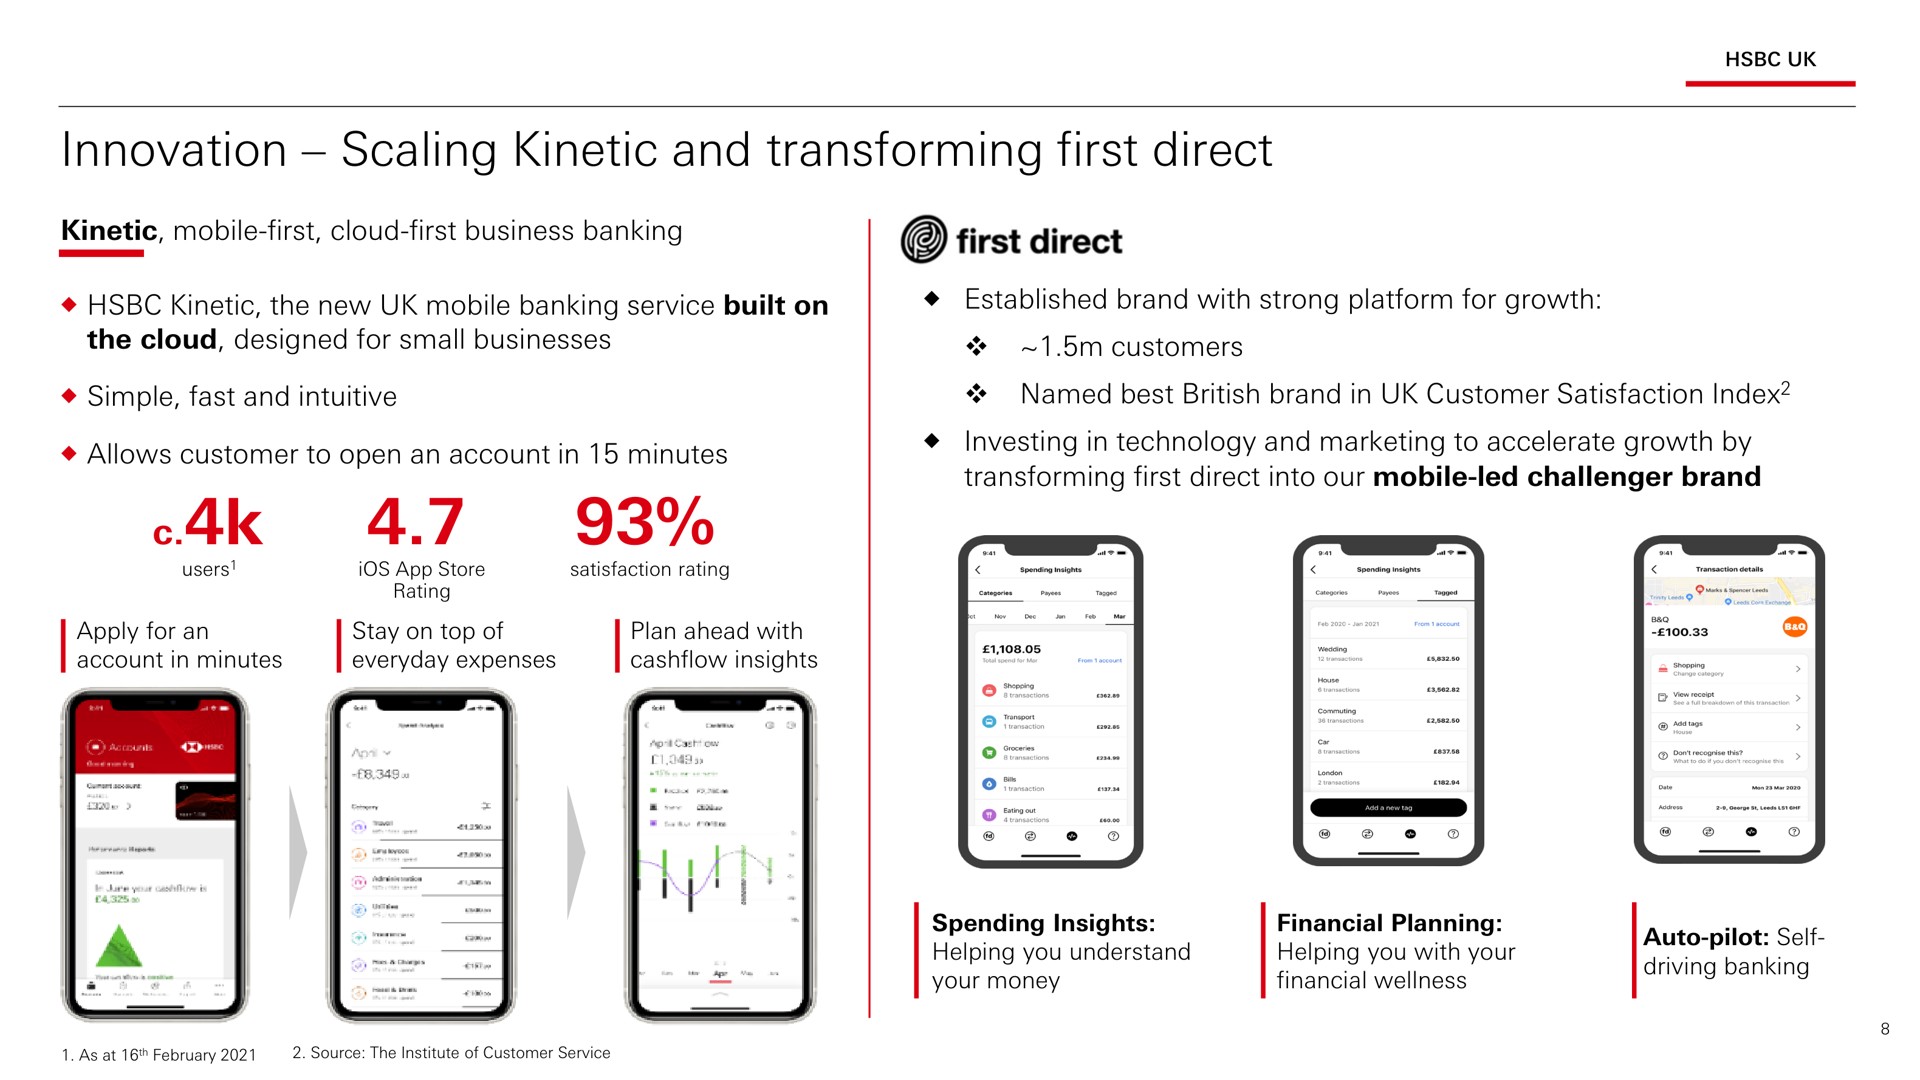 innovation scaling kinetic and transforming first direct | HSBC